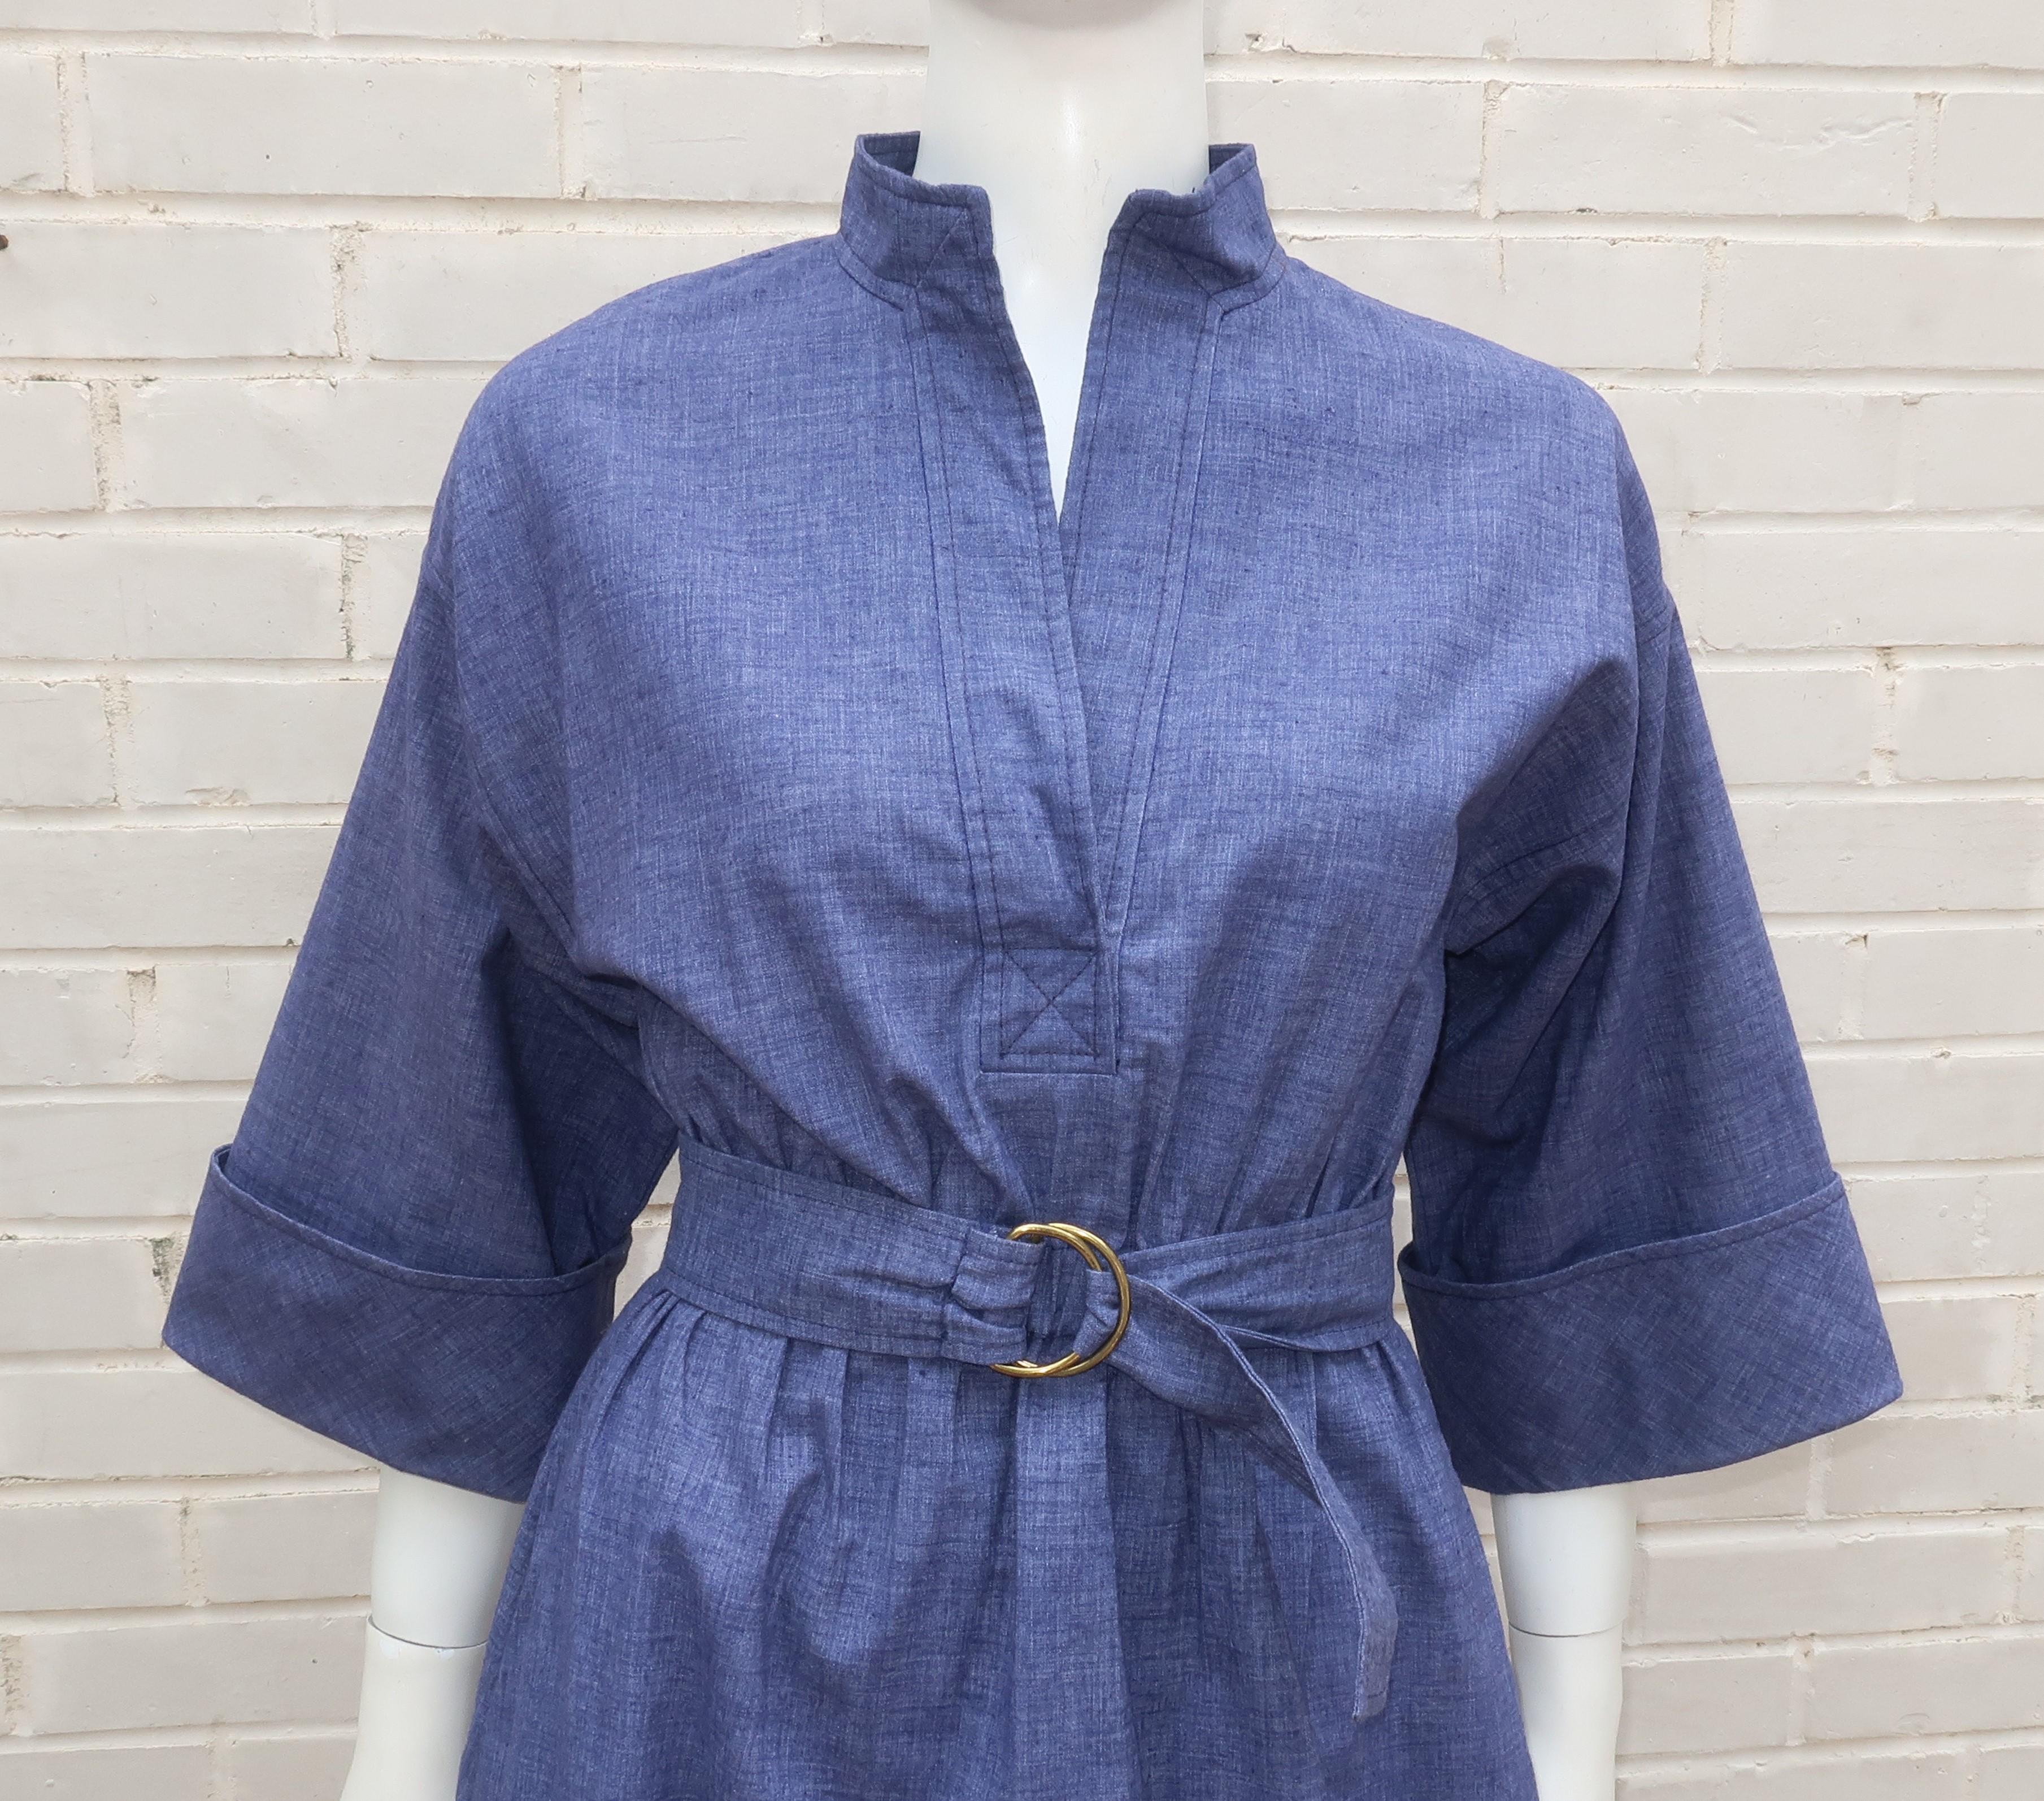 1970’s Saks Fifth Avenue Young Dimensions denim dress with coordinating belt.  The dress is a simple pullover construction with an elasticized waist, tab style collar, side pockets and modified bell sleeves.  A casual chic look with a nod to